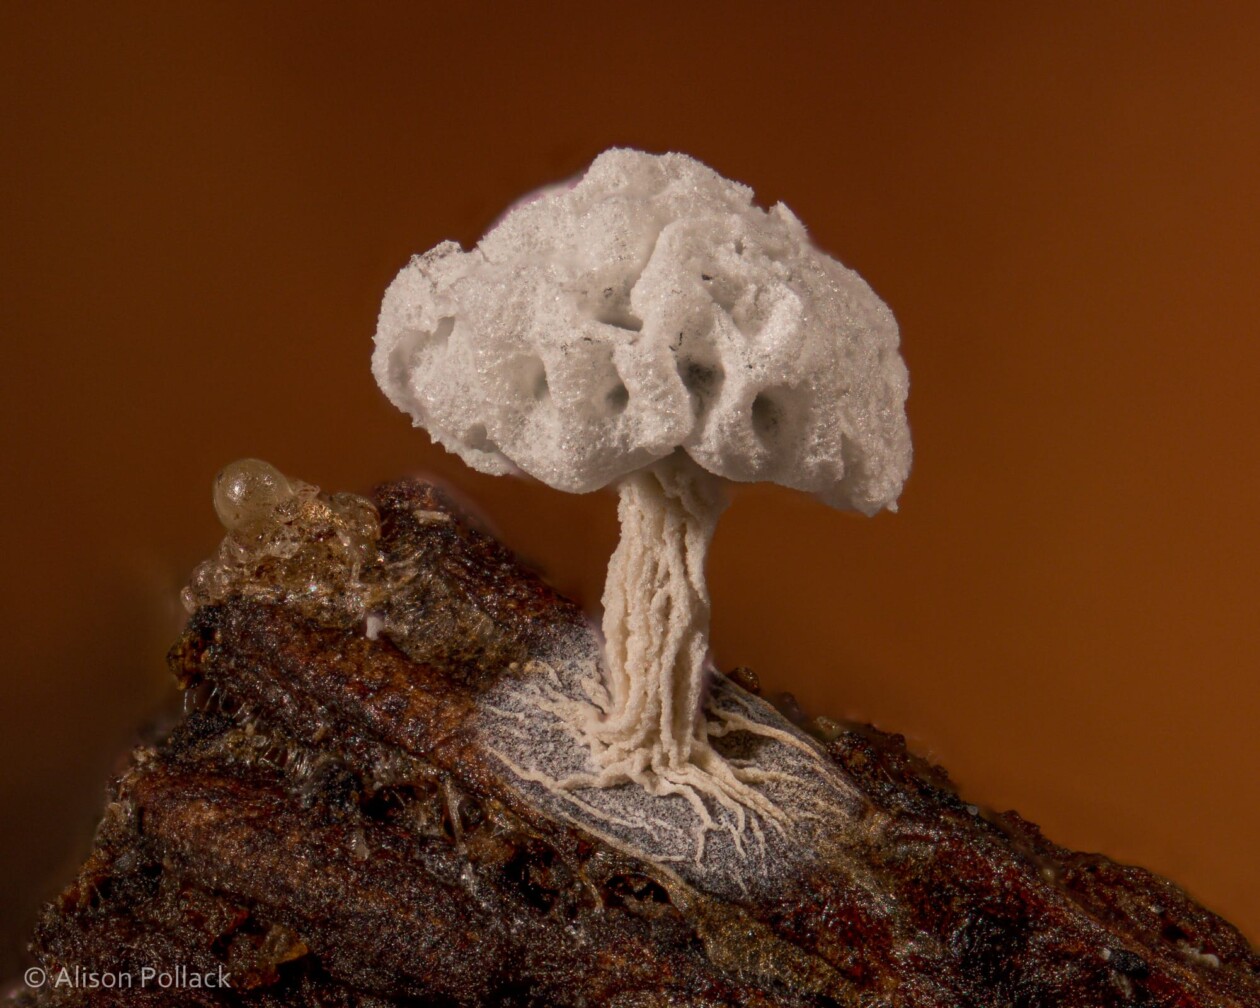 The Microscopic Majesty Of Mushrooms And Molds Captured By Alison Pollack (18)